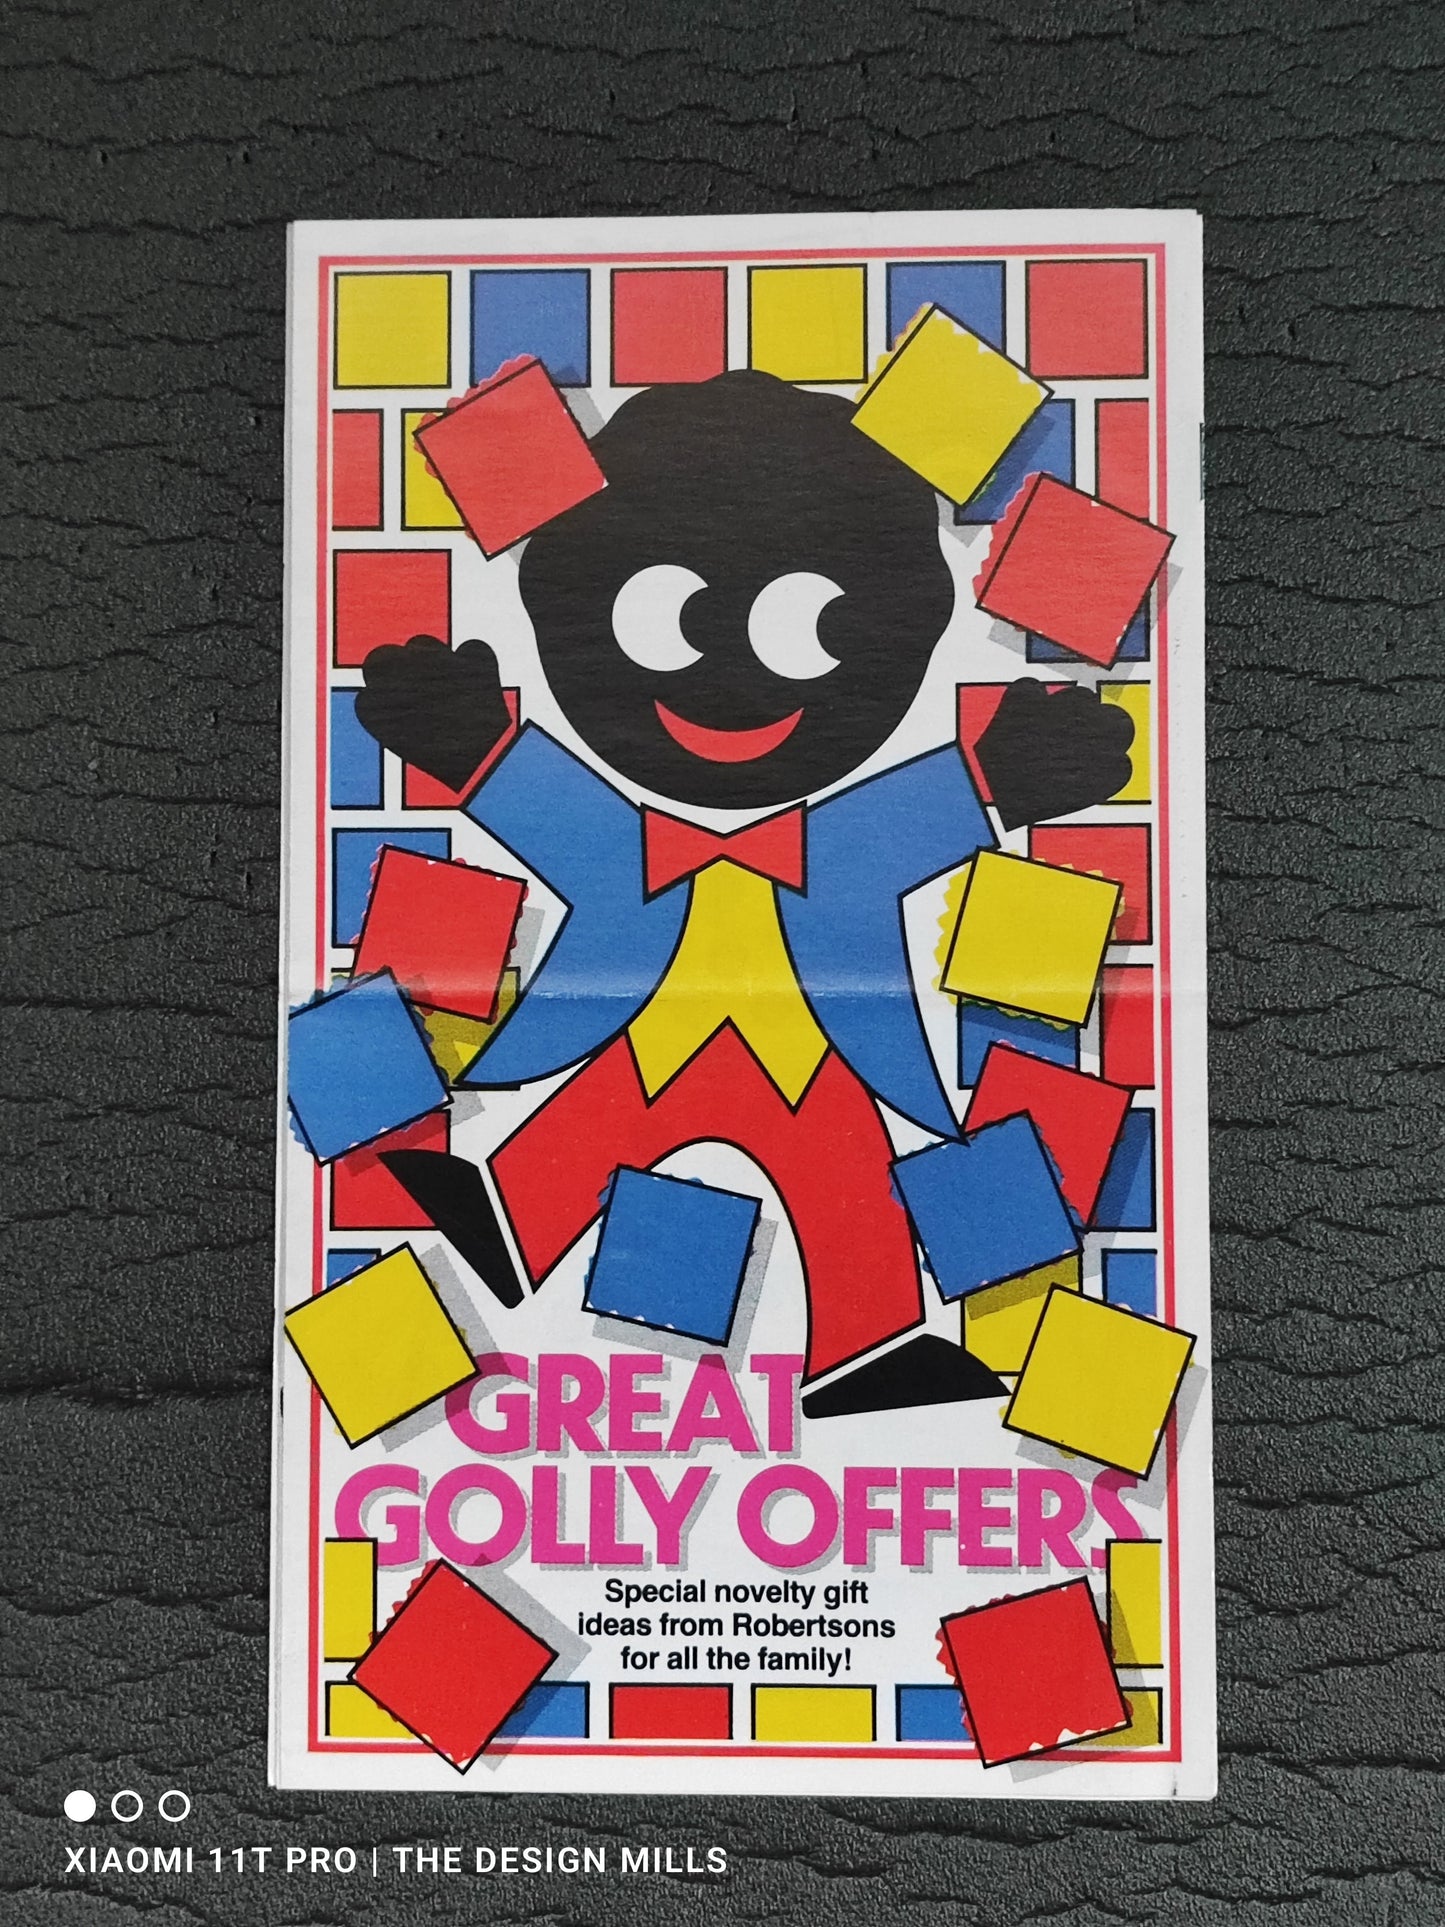 Great Golly Offers Leaflet